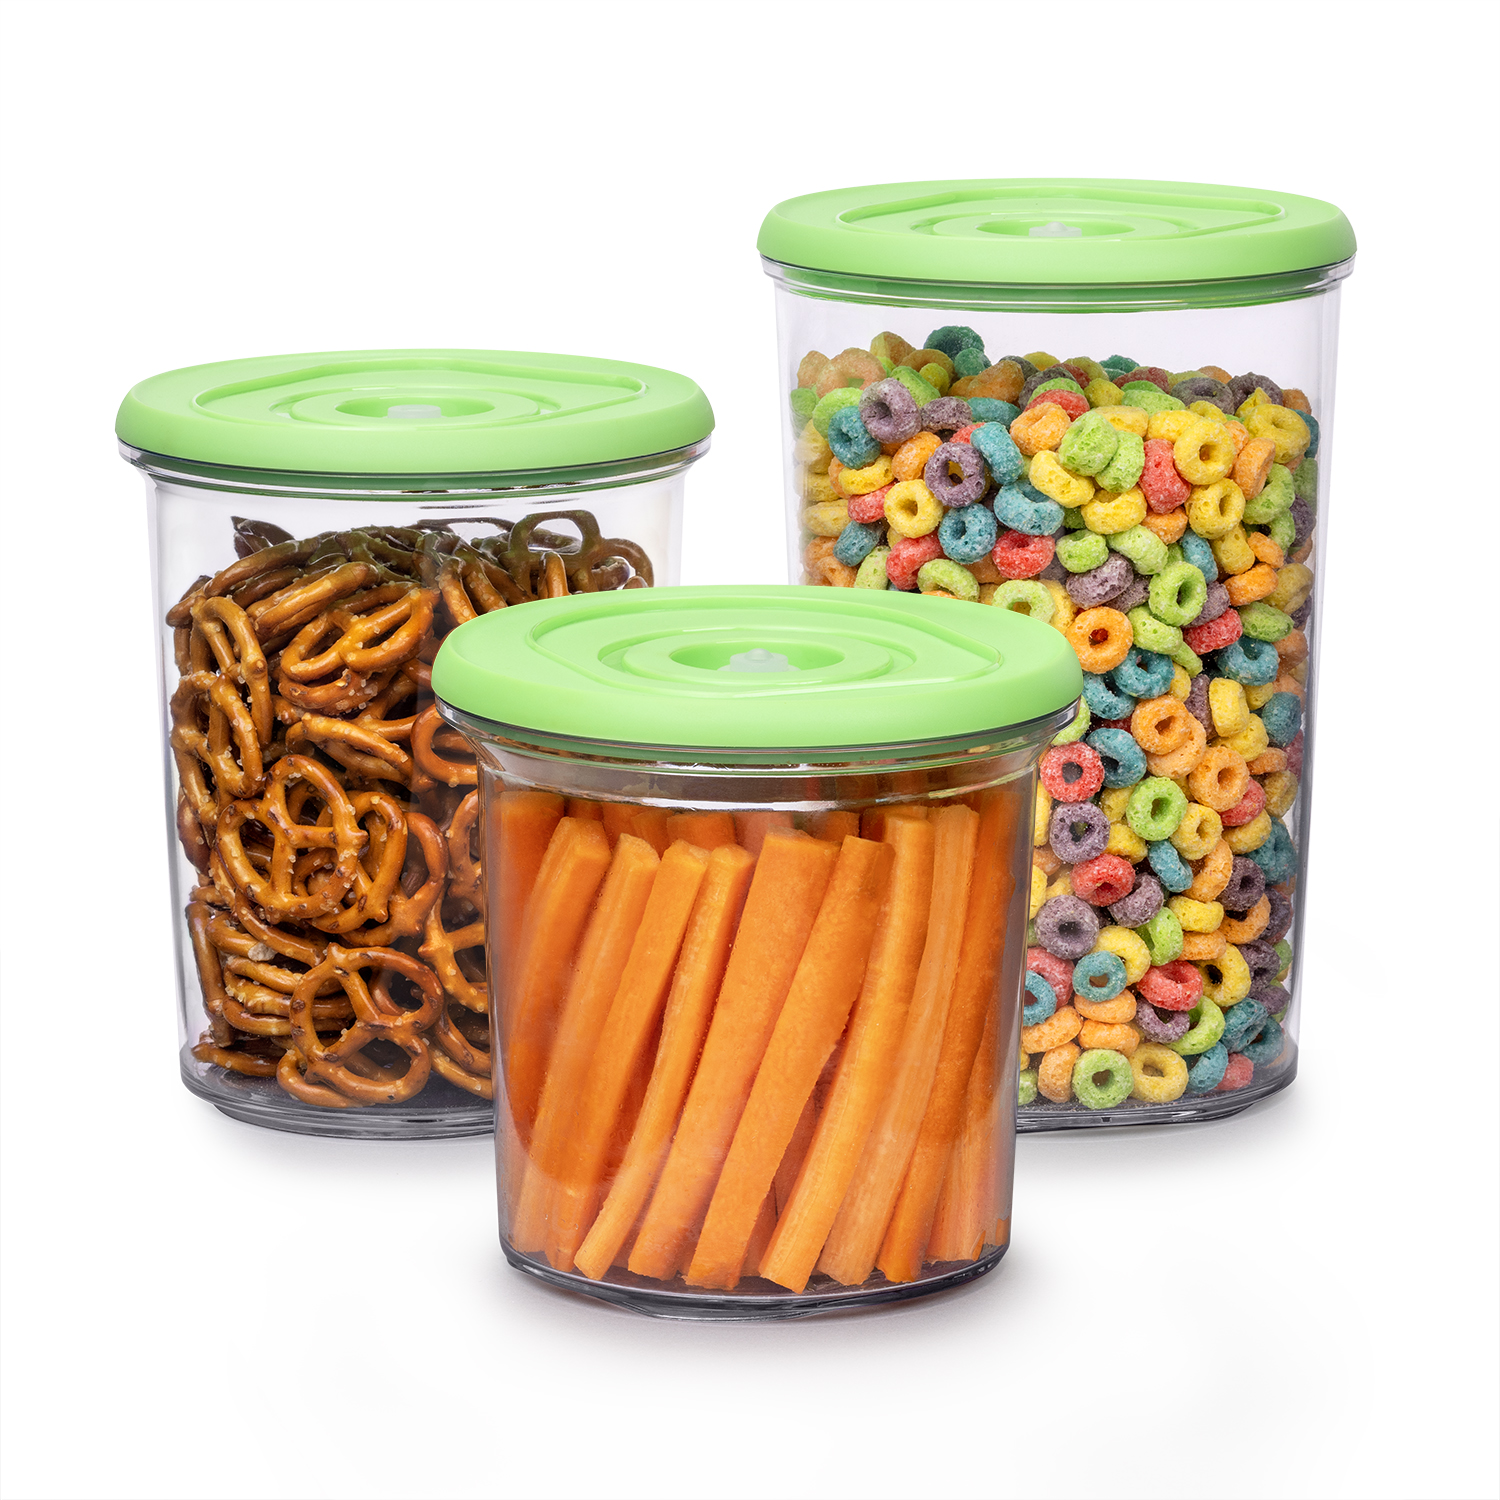 Fresh Produce Vegetable Fruit Storage Containers BPA-free,3Piece